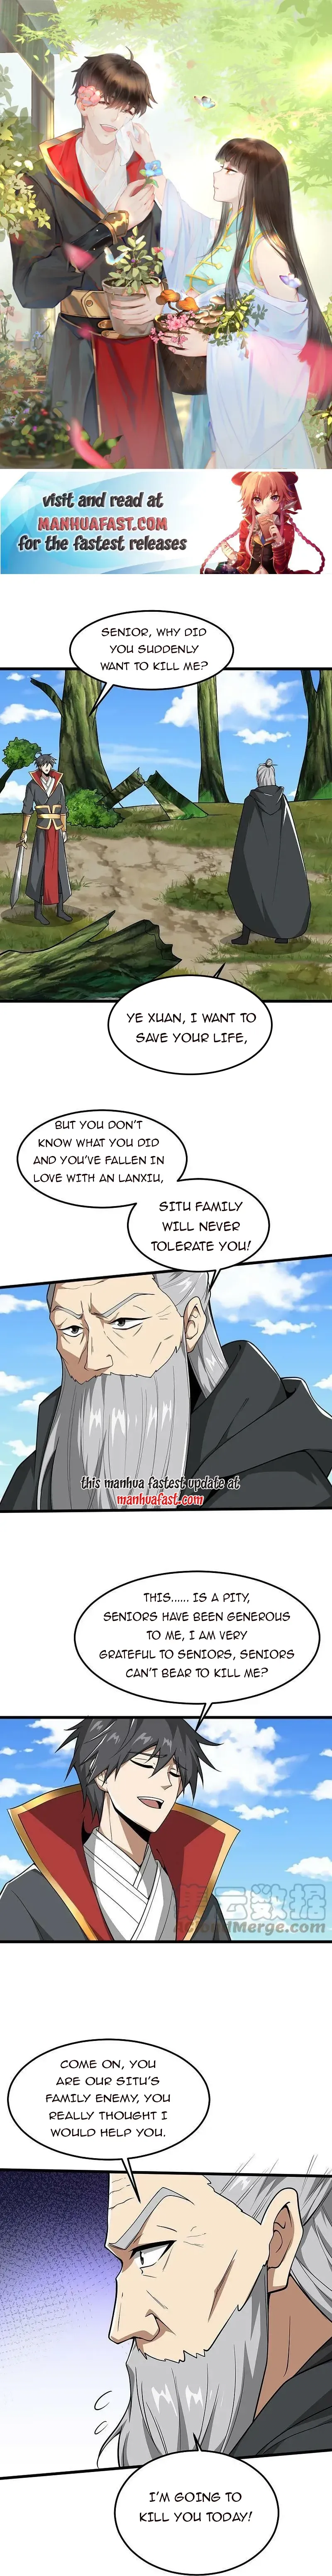 One Sword Reigns Supreme Chapter 294 page 1